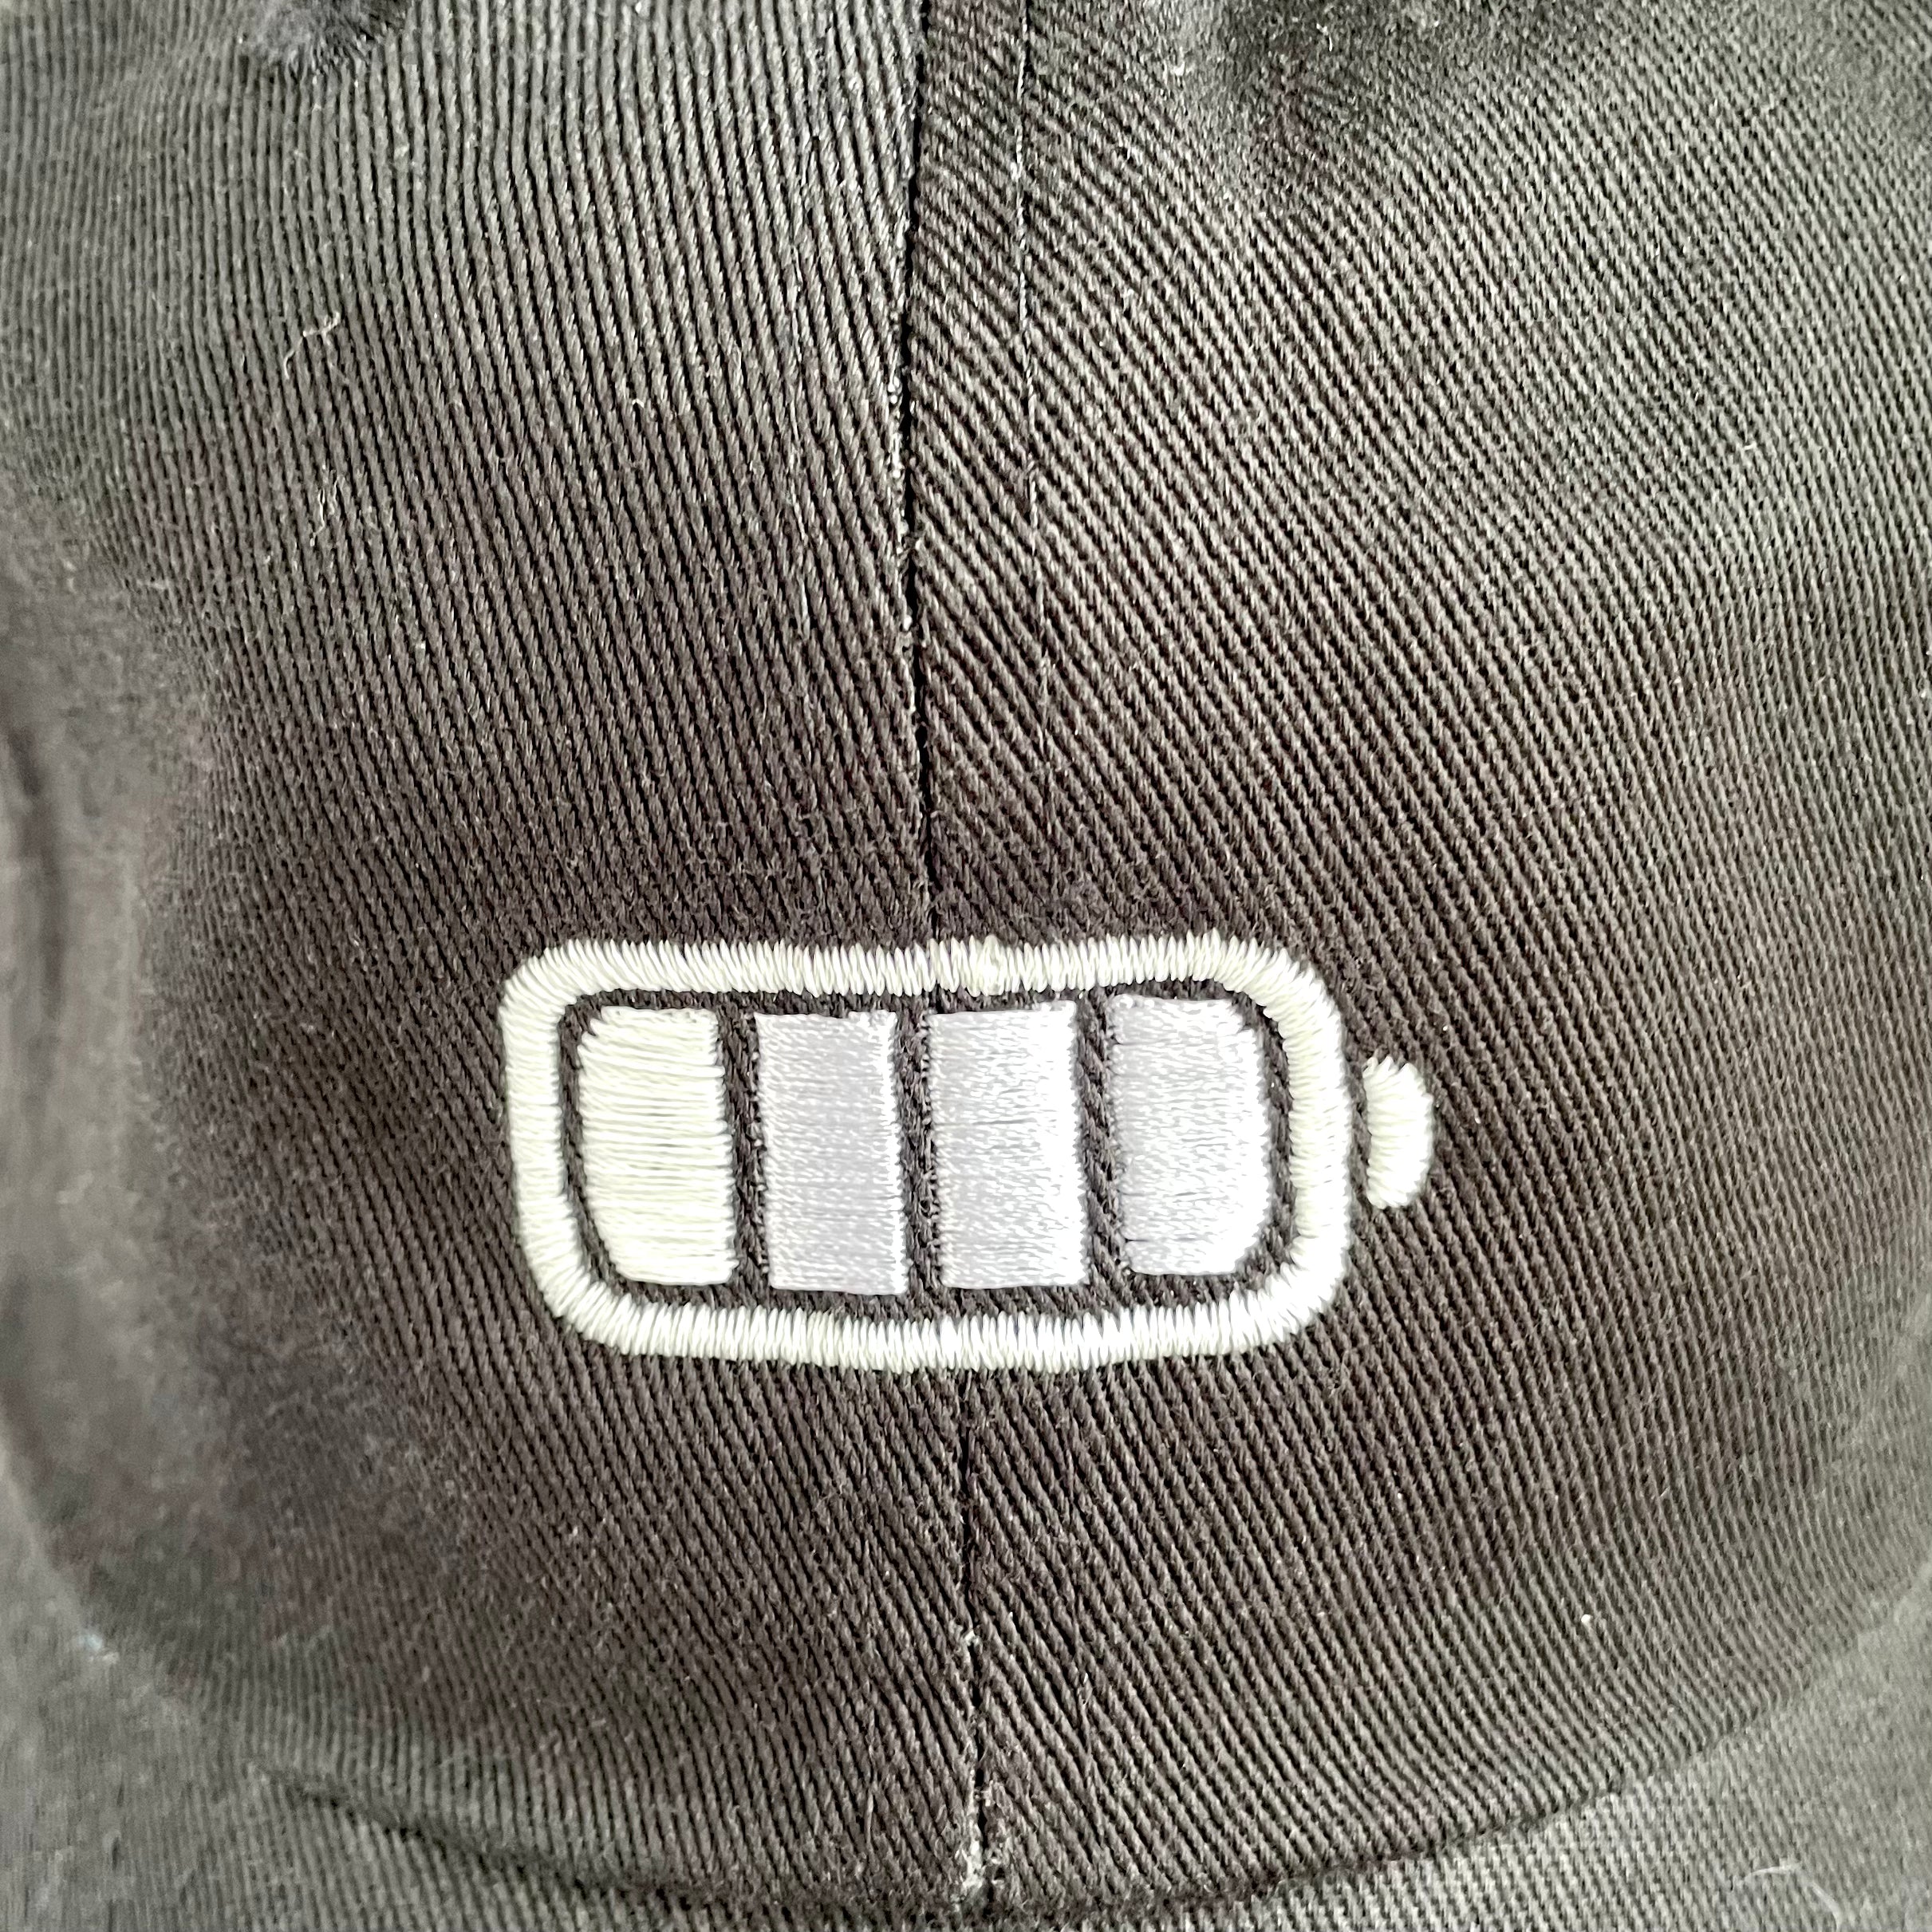 GLOW IN THE DARK FULL BATTERY AND LOW BATTERY DAD HAT